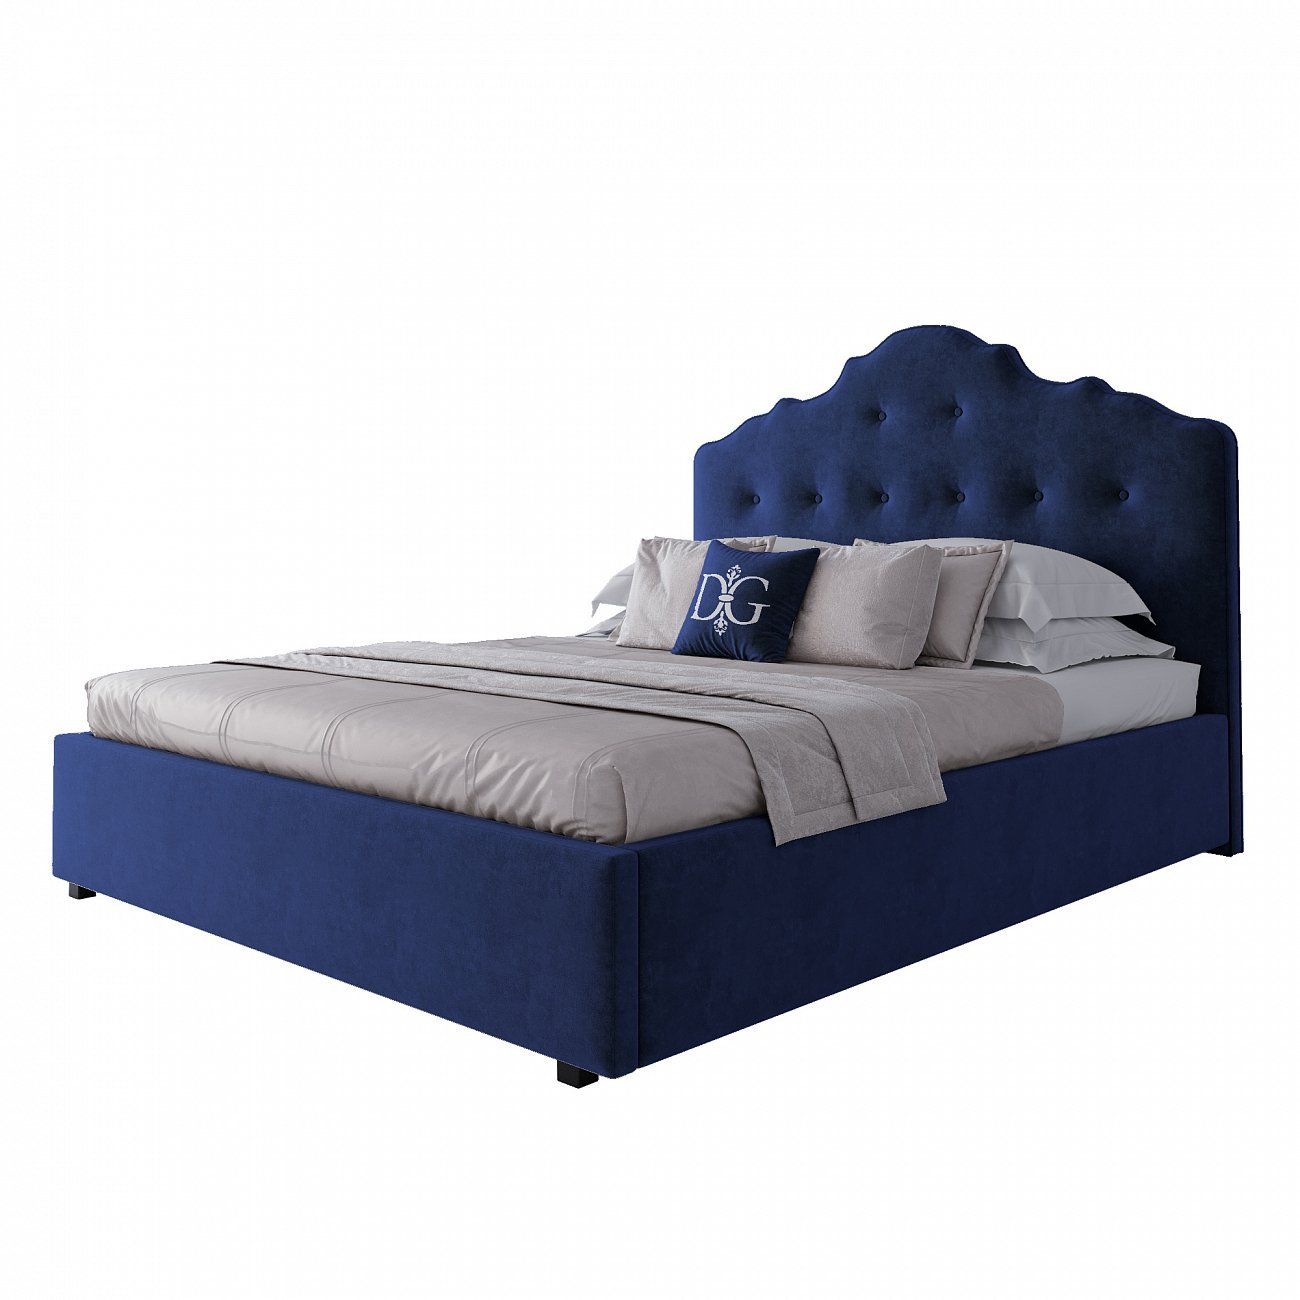 Double bed 160x200 cm blue Palace